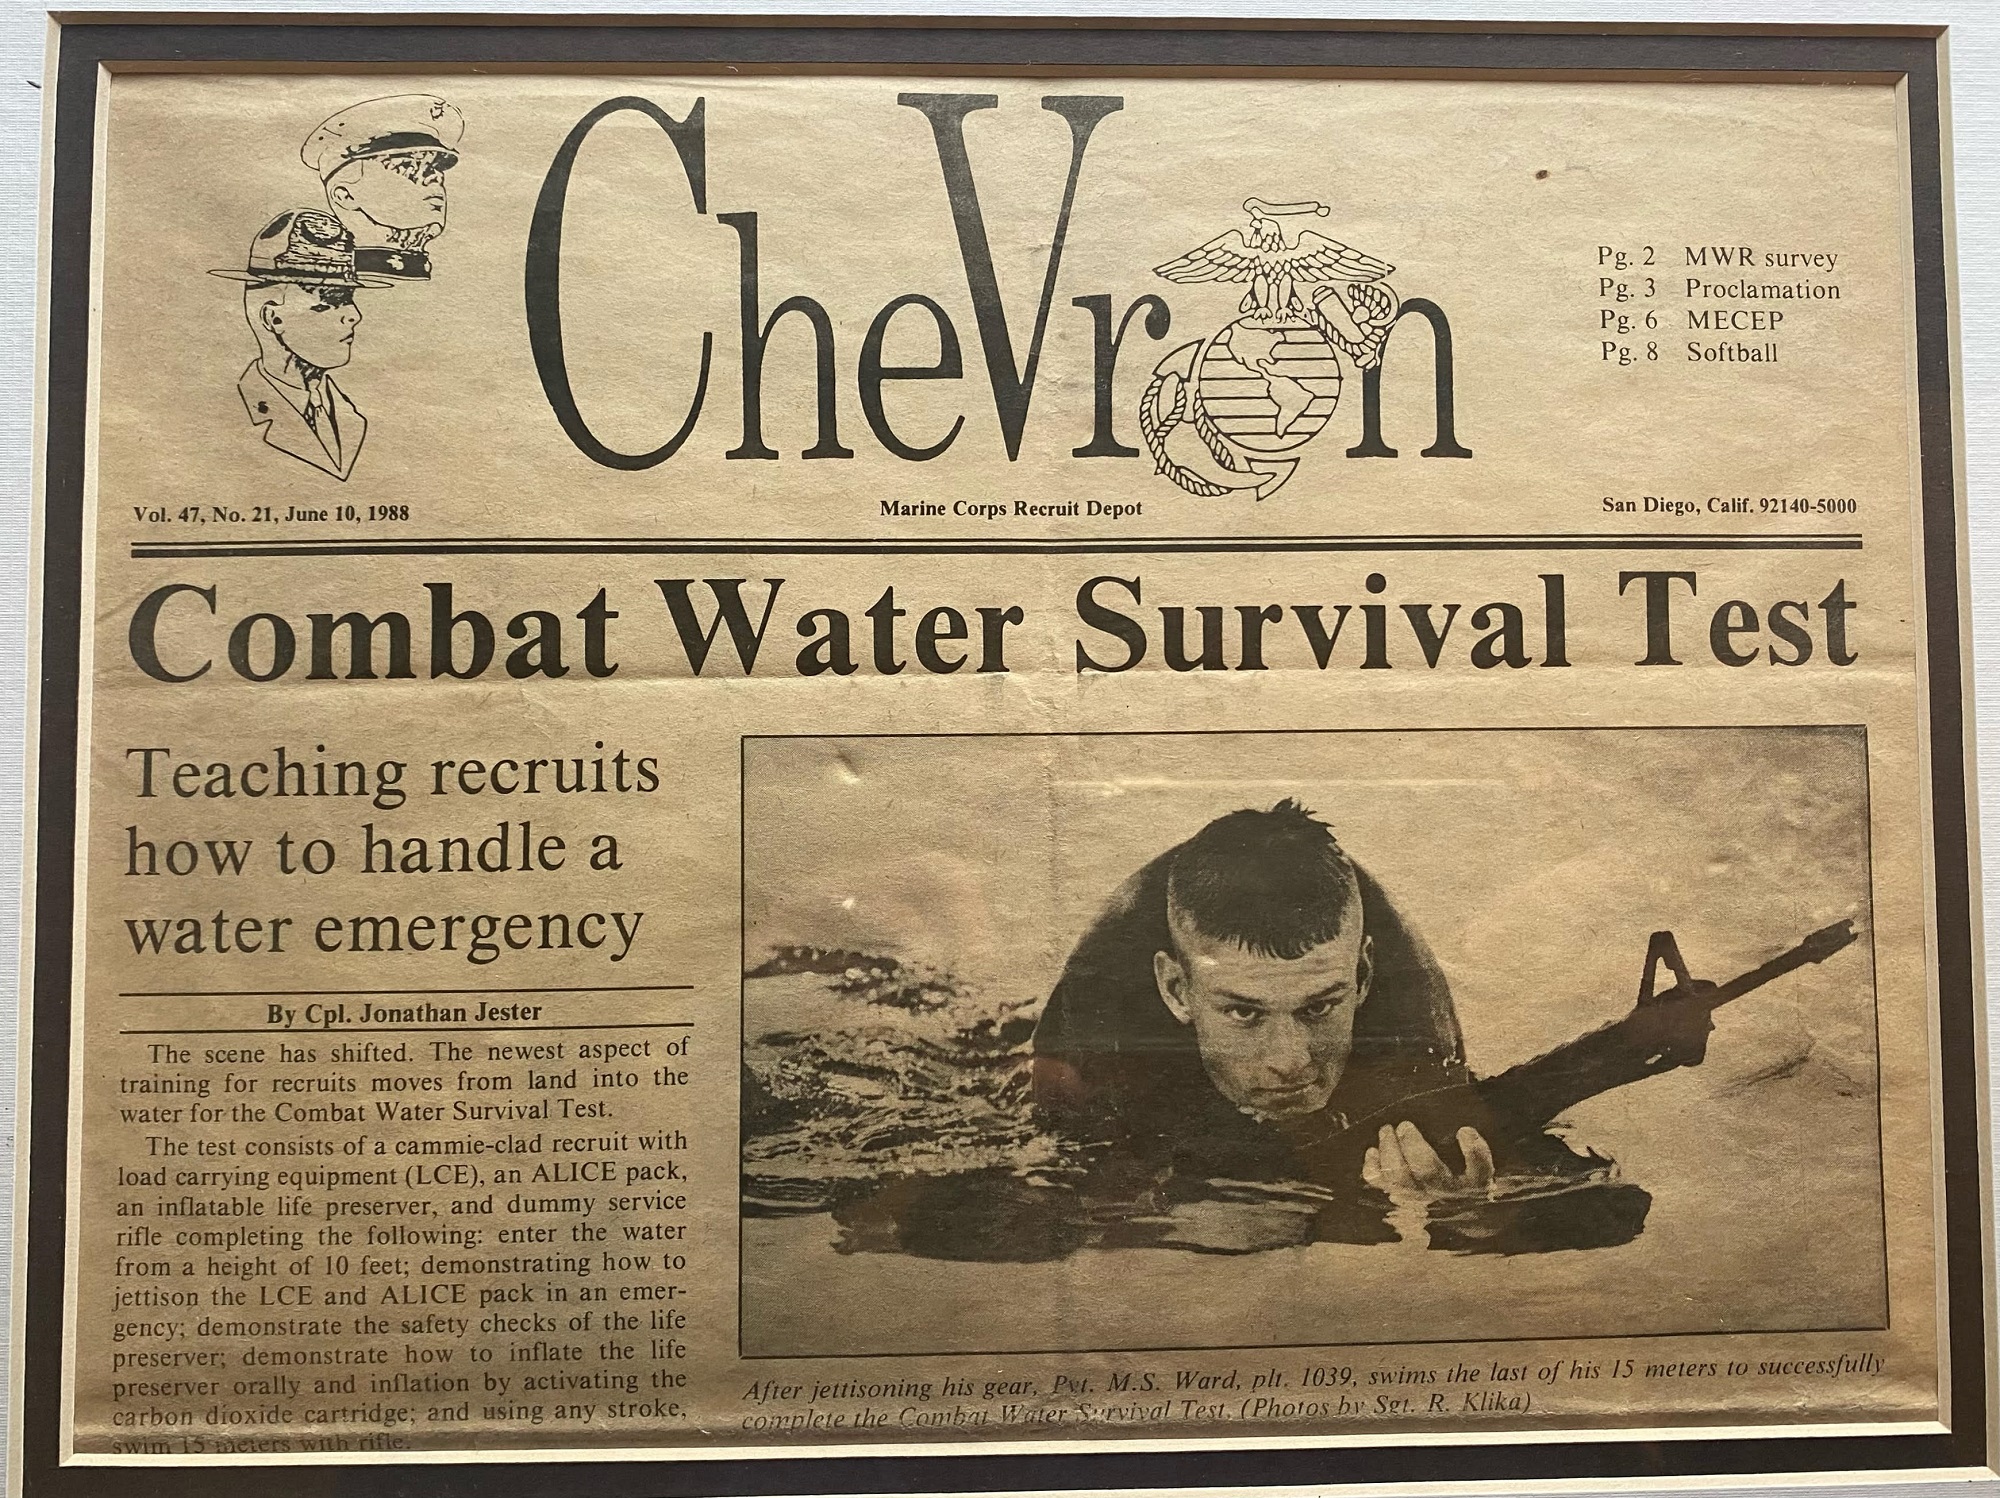 Ward 1988 Mitch testing for Combat Water Survival in boot camp - pictured on the front page of the Chevron Marine Corps Recruit Depot newspaper